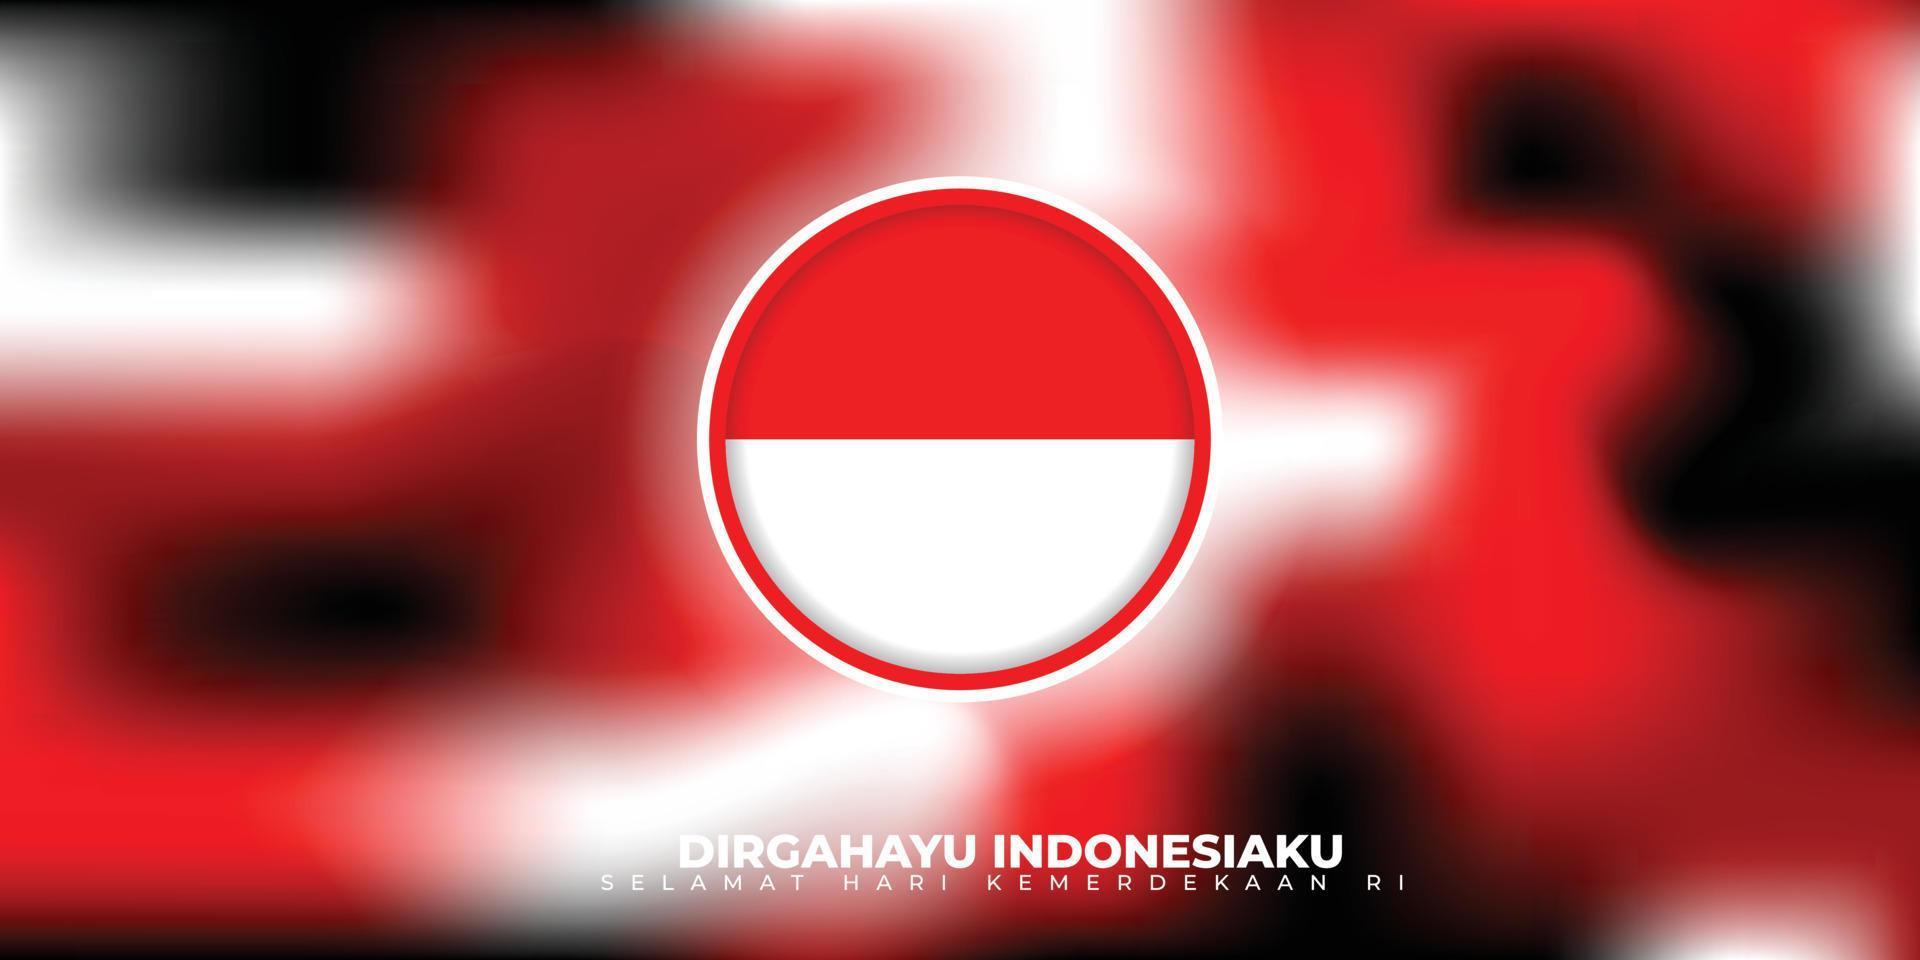 Indonesia Independence day with red white and black abstract background design. vector